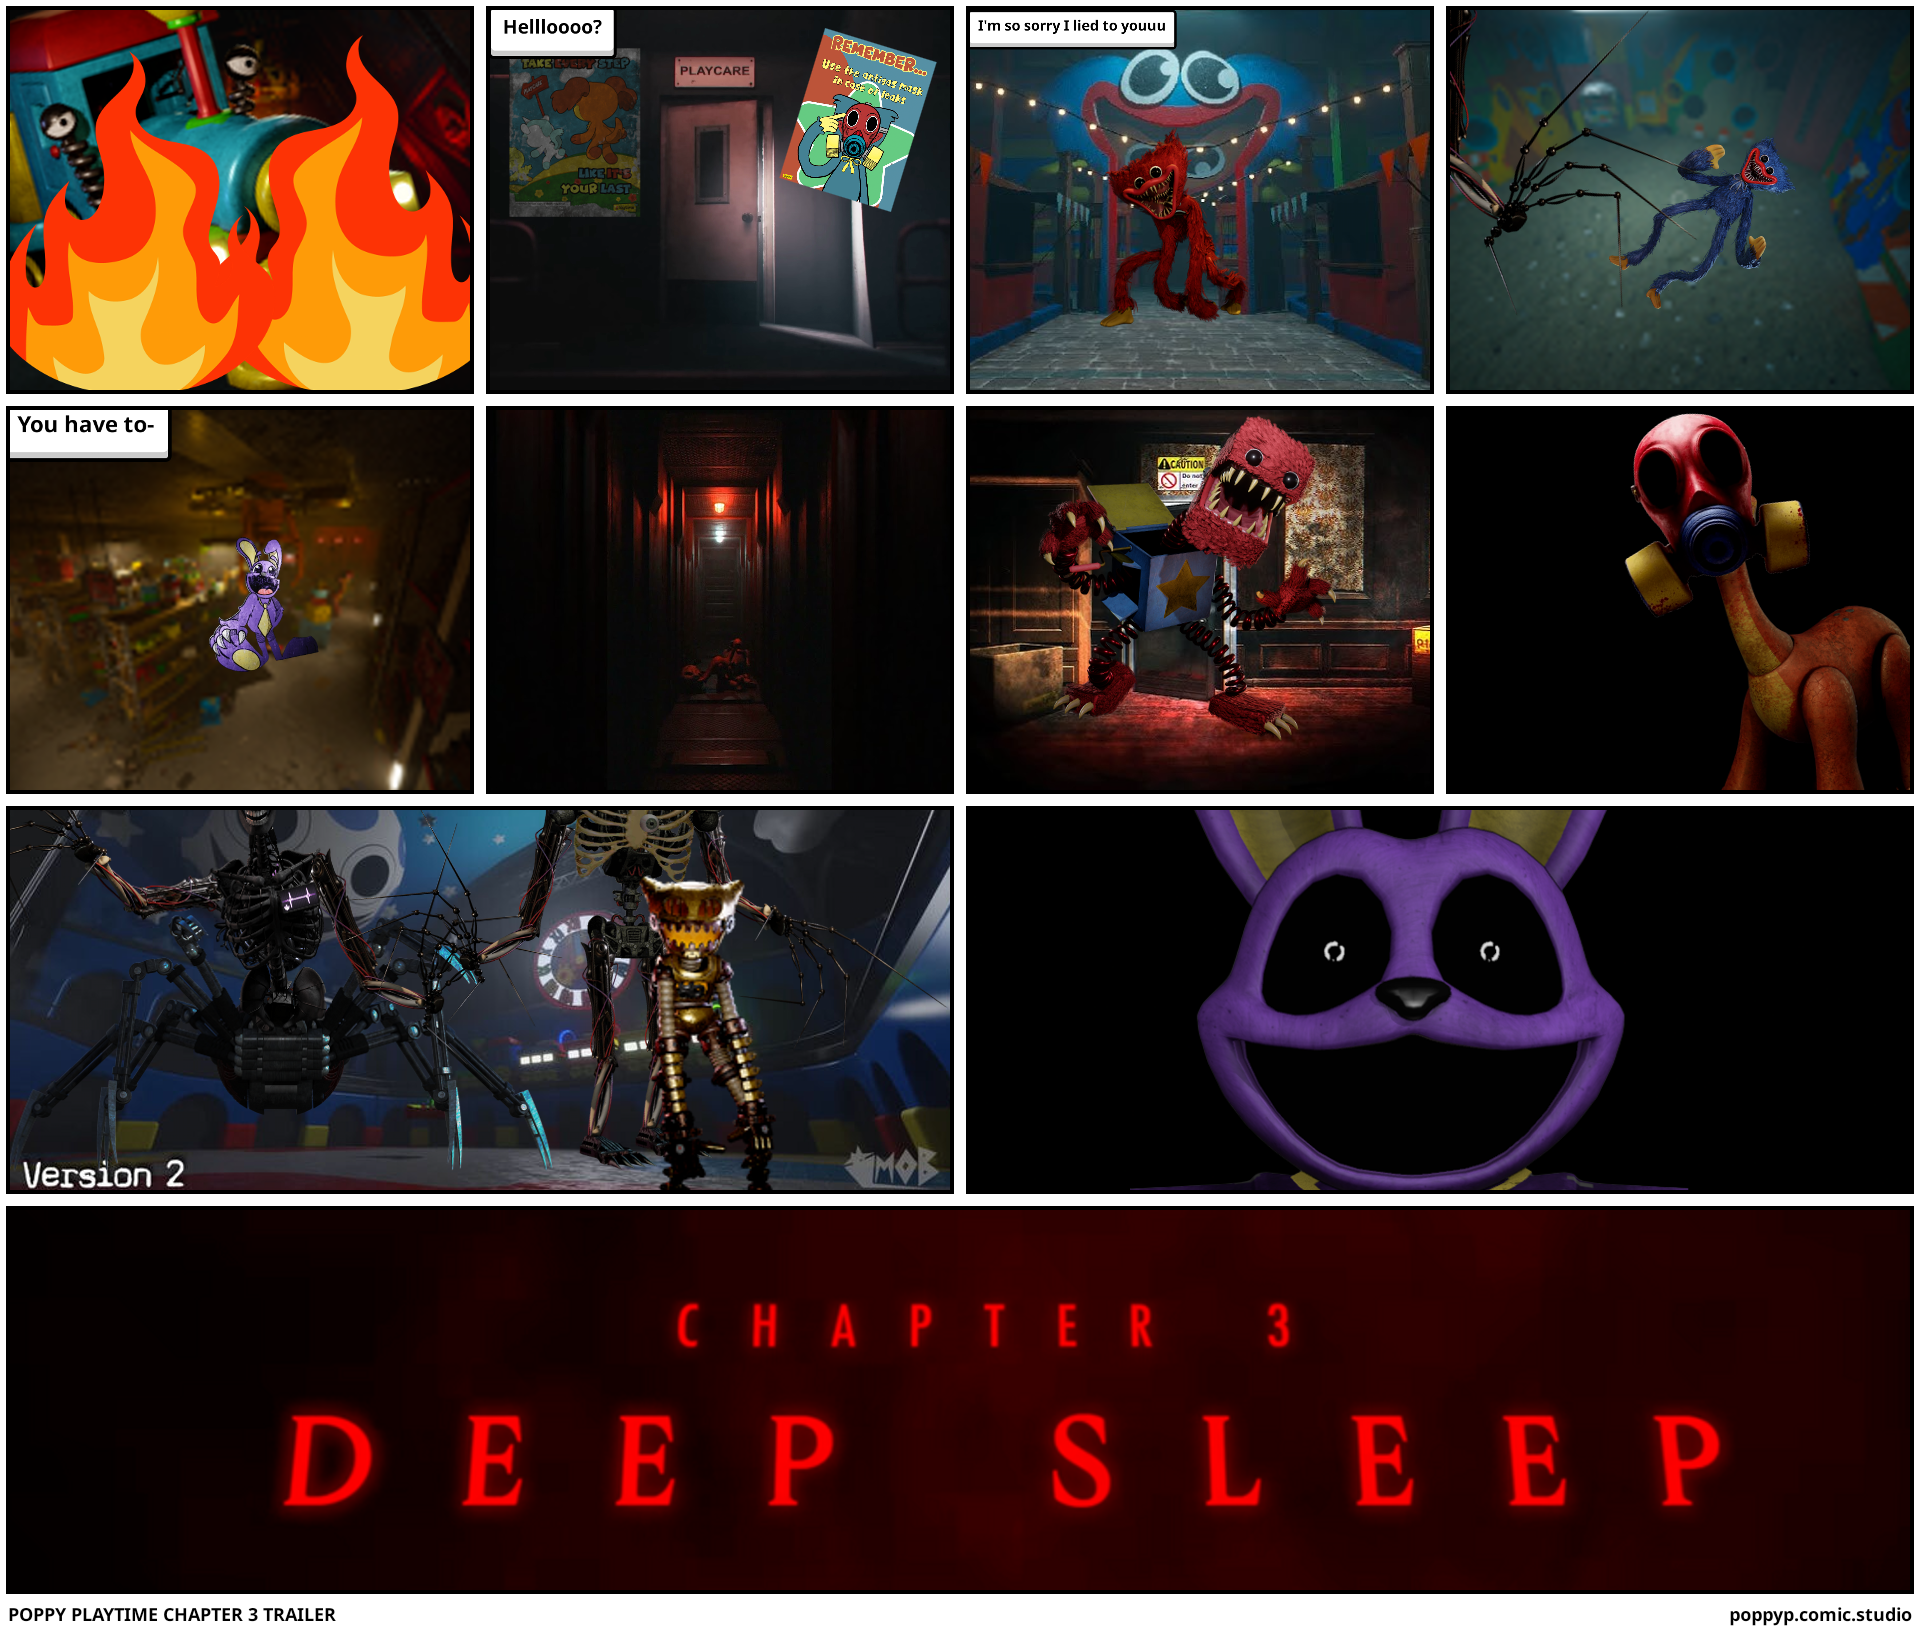 Poppy playtime, chapter 3 deep sleep, official trailer, puppy playtime 3